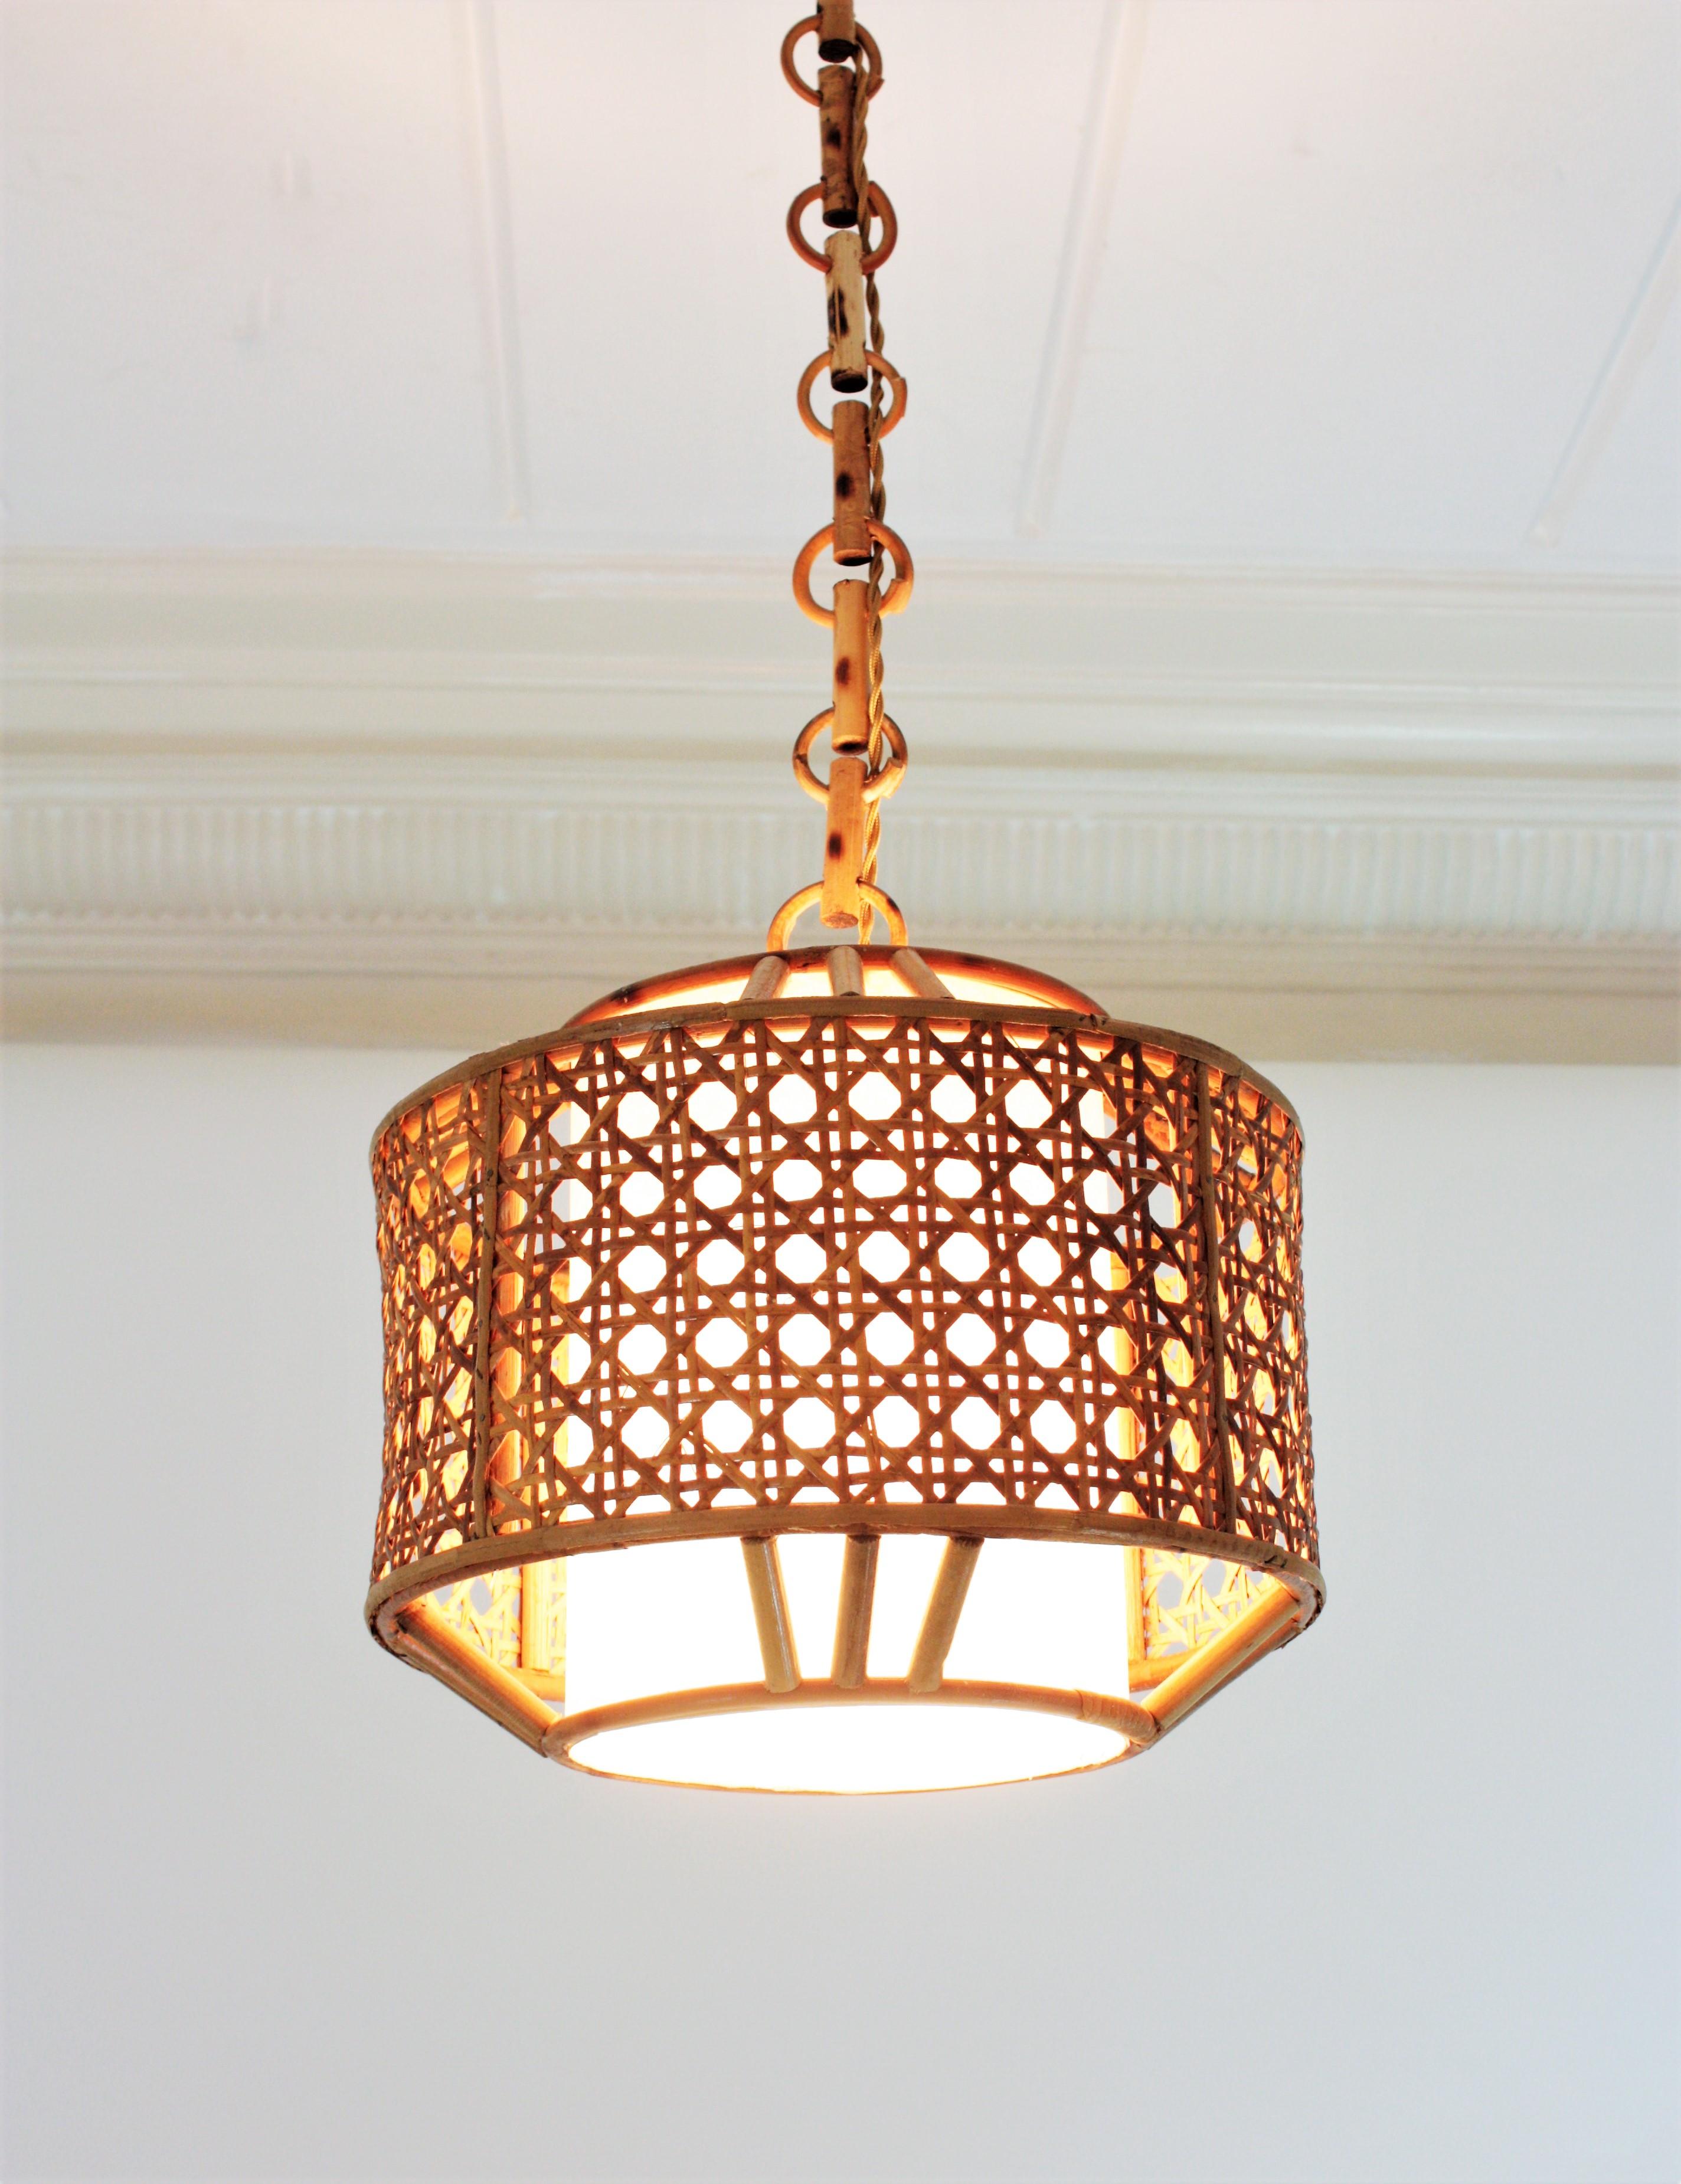 Hand-Crafted Bamboo Rattan and Wicker Weave Drum Pendant Light or Lantern  For Sale